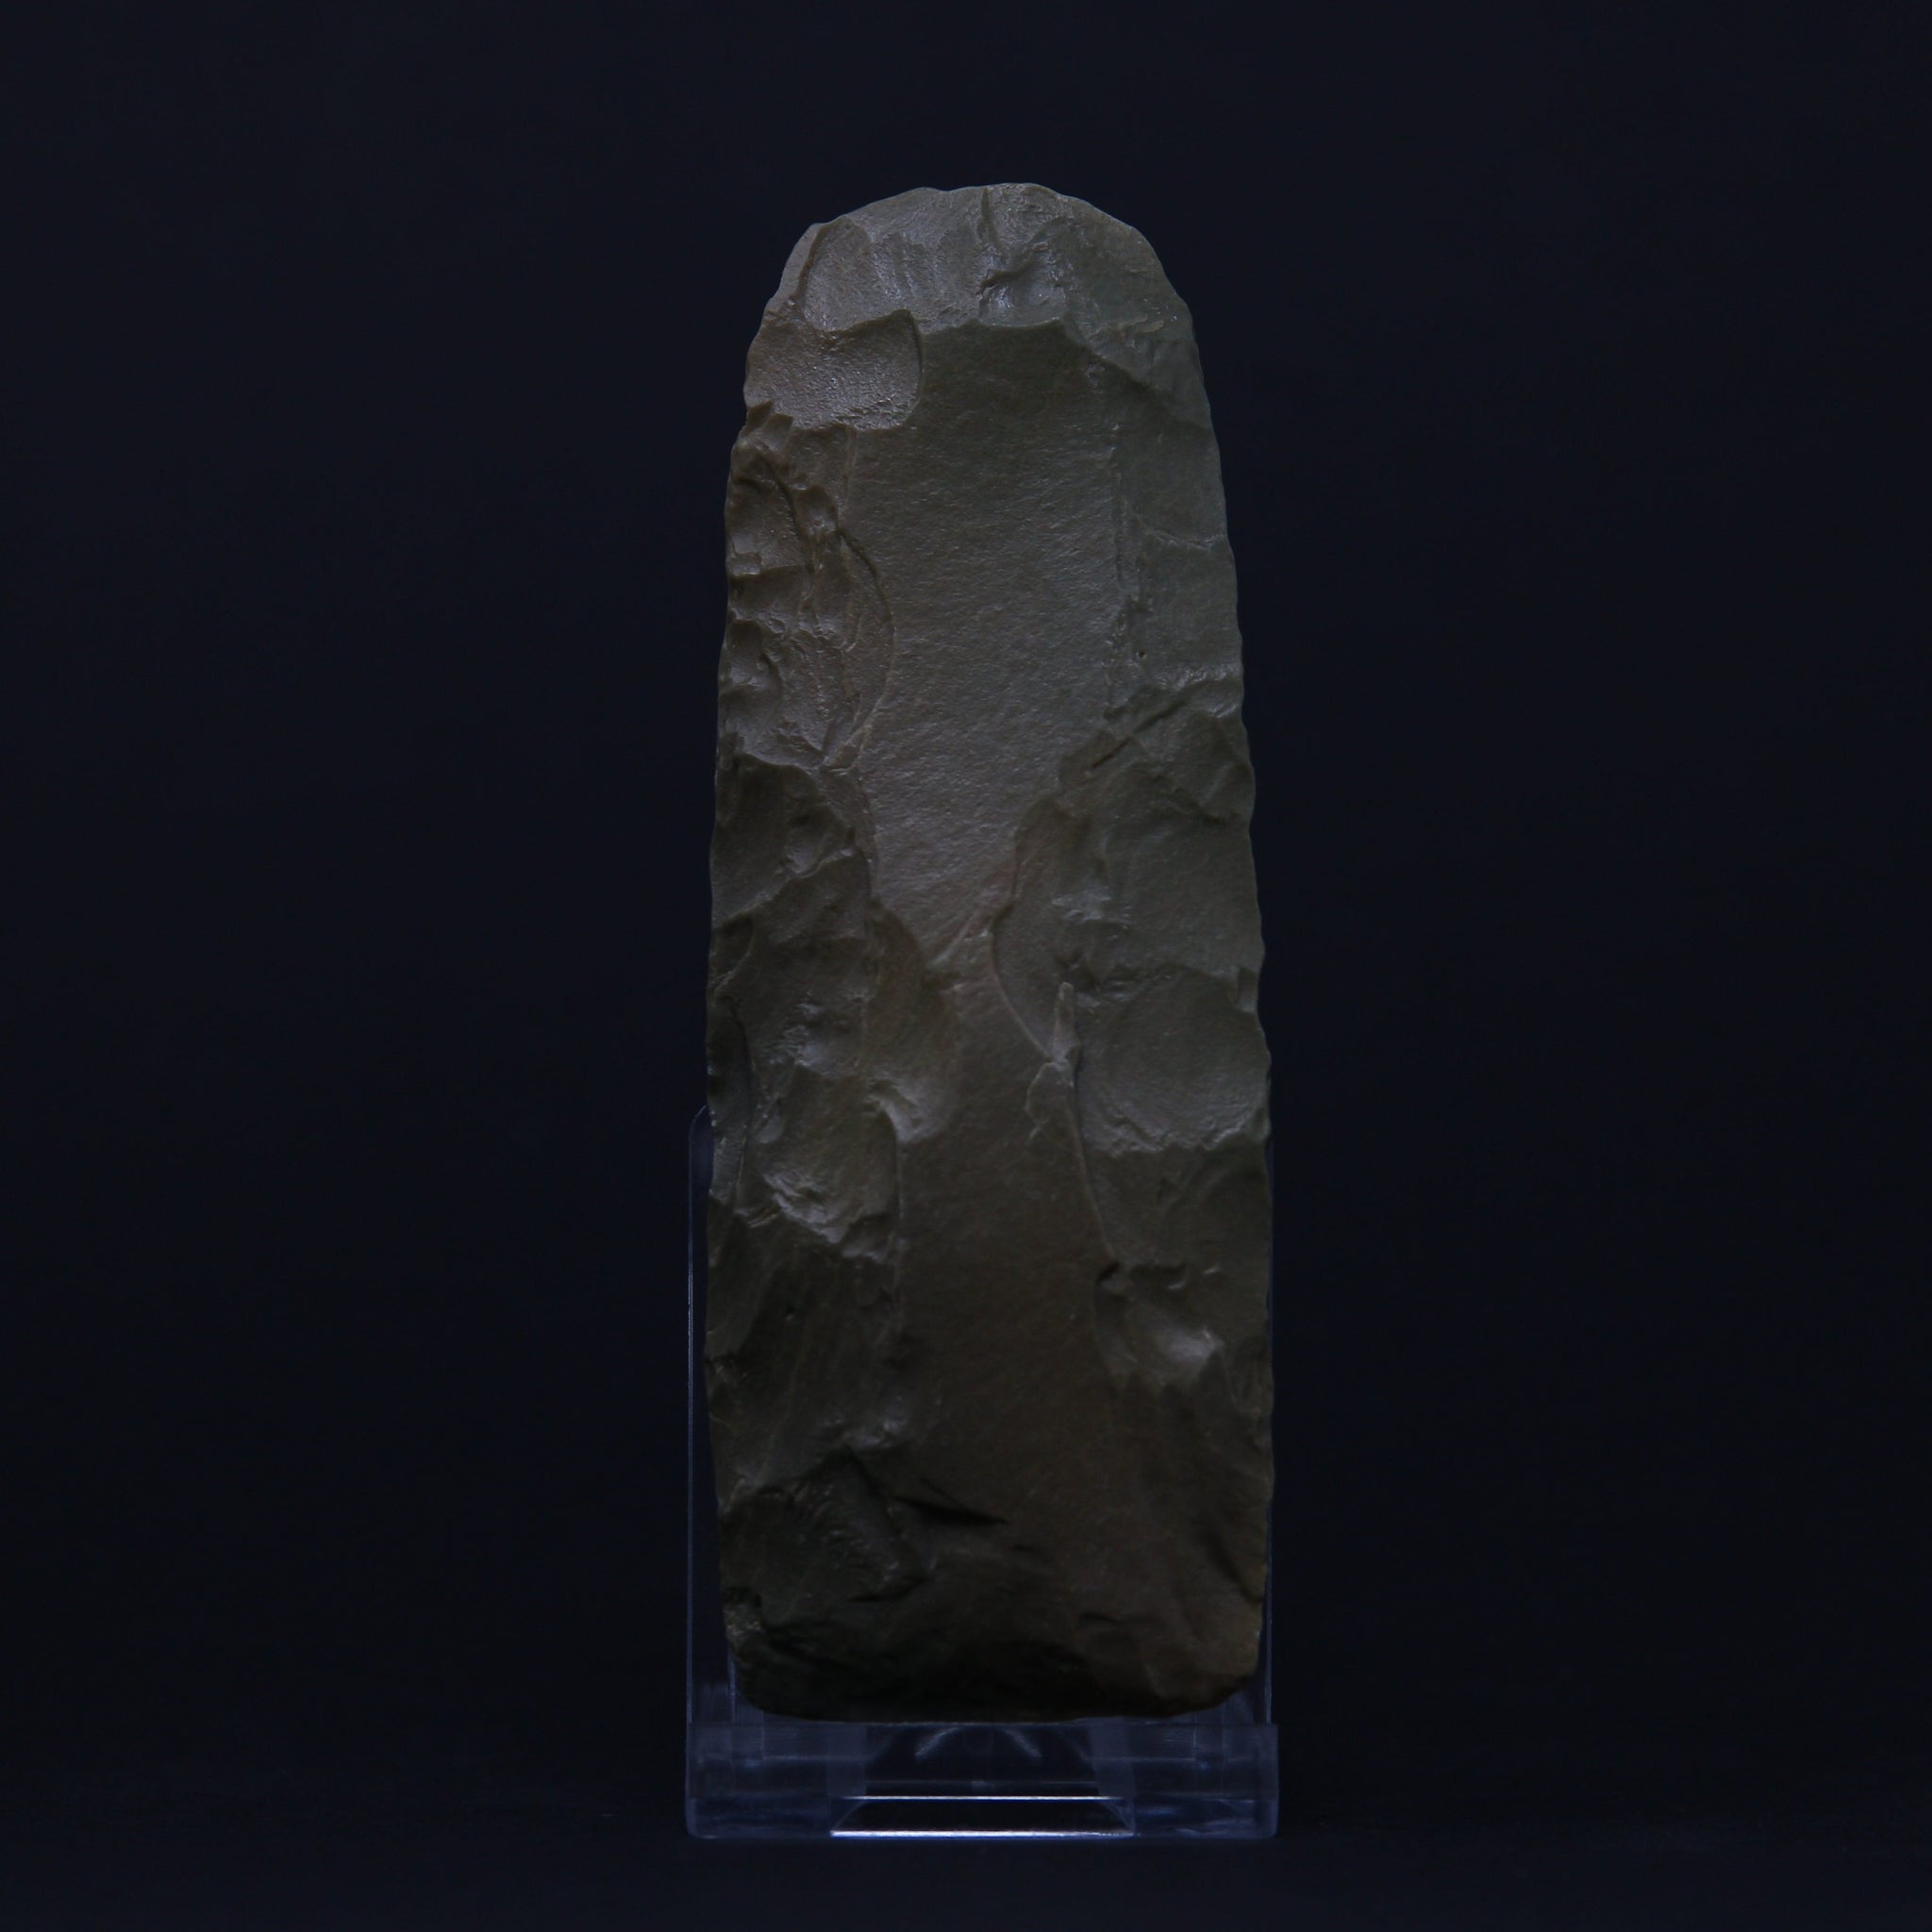 A Neolithic finely worked polished jasper axe |  Tenerean-culture, 7200-4500 BP